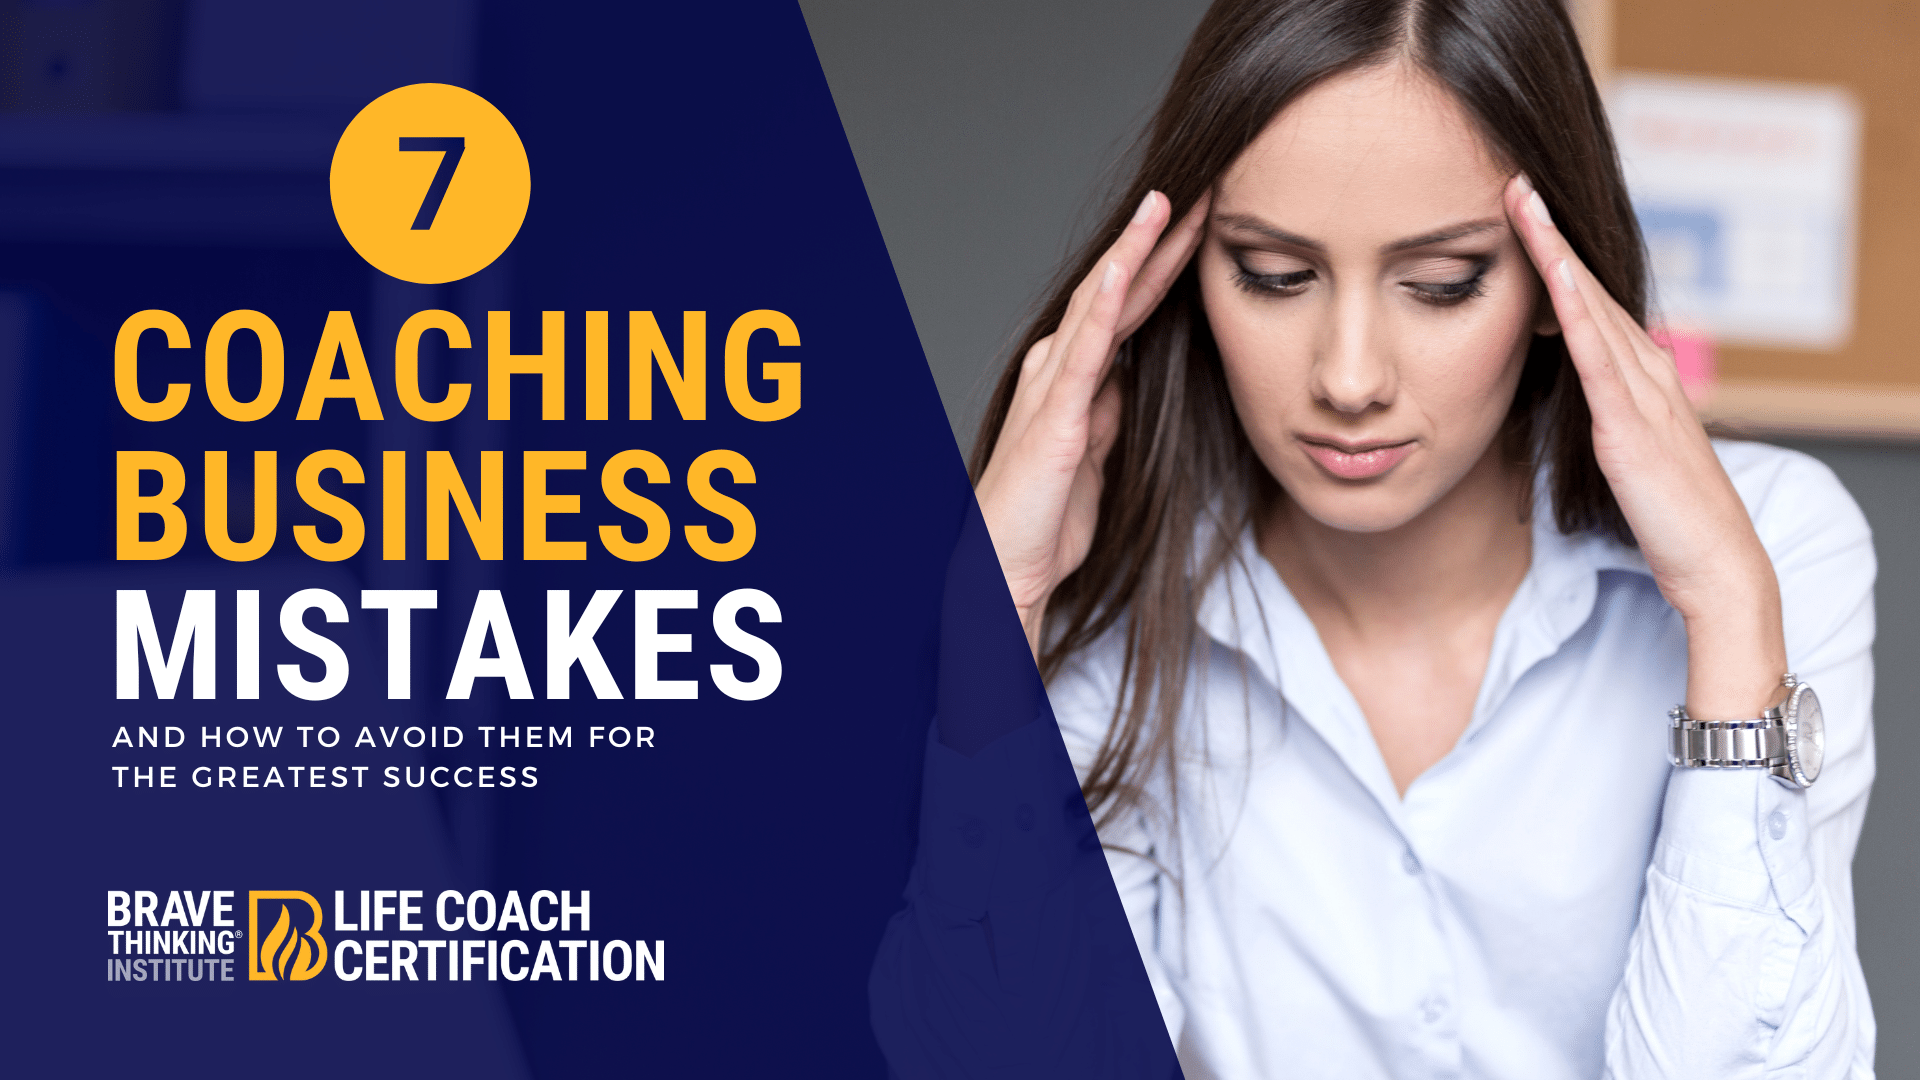 Common Small Business Mistakes Successful Life Coaches Avoid